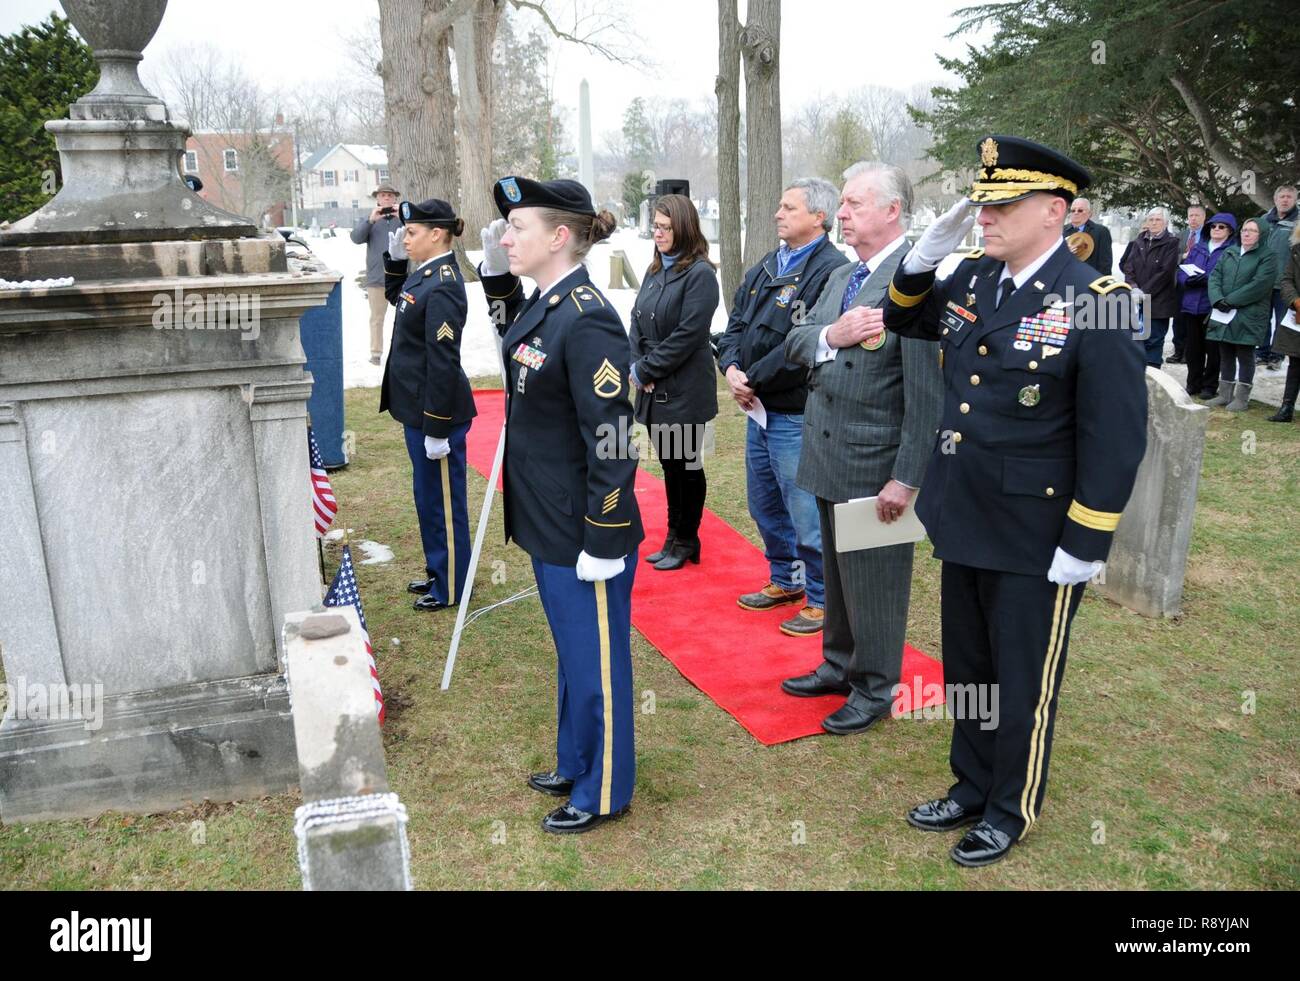 Maj. Gen. Troy D. Kok, commanding general of the U.S. Army Reserve’s 99th Regional Support Command (right), salutes during the playing of taps at the Presidential Wreath Laying event March 18 for President Grover Cleveland at Princeton Cemetery, New Jersey. Kok hosted and spoke at the event along with New Jersey State Senator Christopher “Kip” Bateman, Princeton Mayor Liz Lempert, and Mr. Robert J. Maguire, civilian aide to the Secretary of the Army for New Jersey. Stock Photo